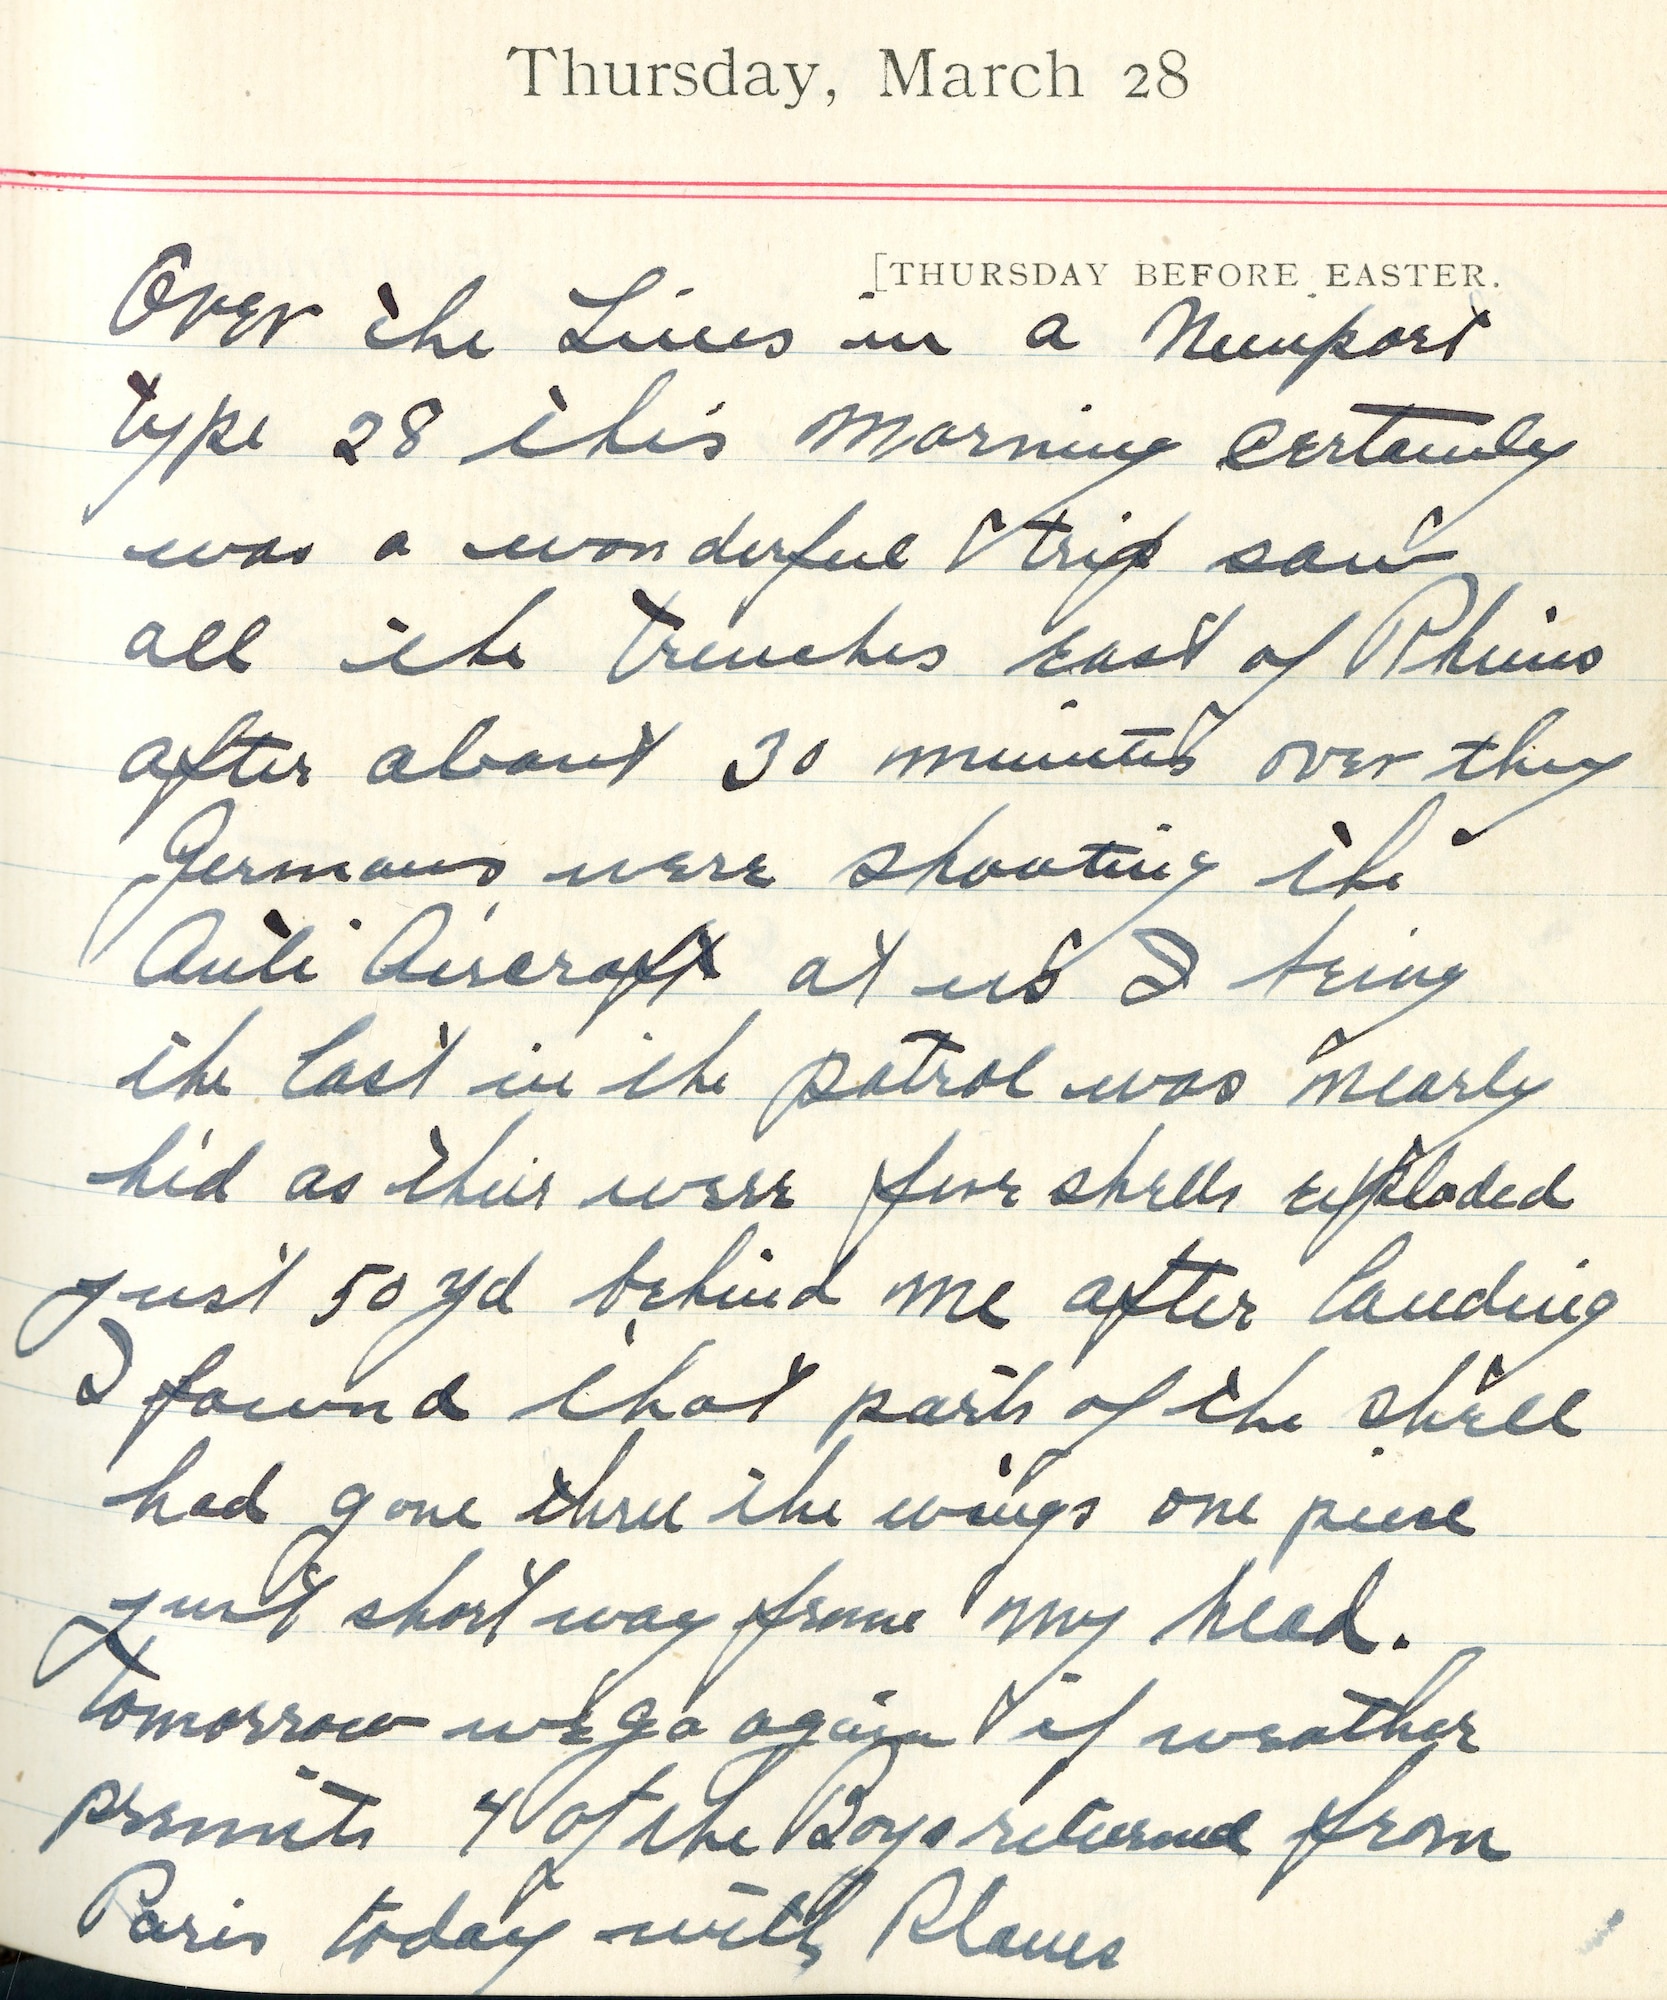 Capt. Edward V. Rickenbacker's 1918 wartime diary entry. (03/28/1918).

Over the lines in a Nieuport type 28 this morning.  Certainly was a wonderful trip.  Saw all the trenches east of Rheims.  After about 30 minutes over, the Germans were shooting the antiaircraft at us.  I being the last in the patrol was nearly hit as there were five shells exploded just 50 yd behind me.  After landing I found that parts of the shell had gone thru the wings.  One piece just short way from my head.  Tomorrow we go again if weather permits.  4 of the boys returned from Paris today with planes.